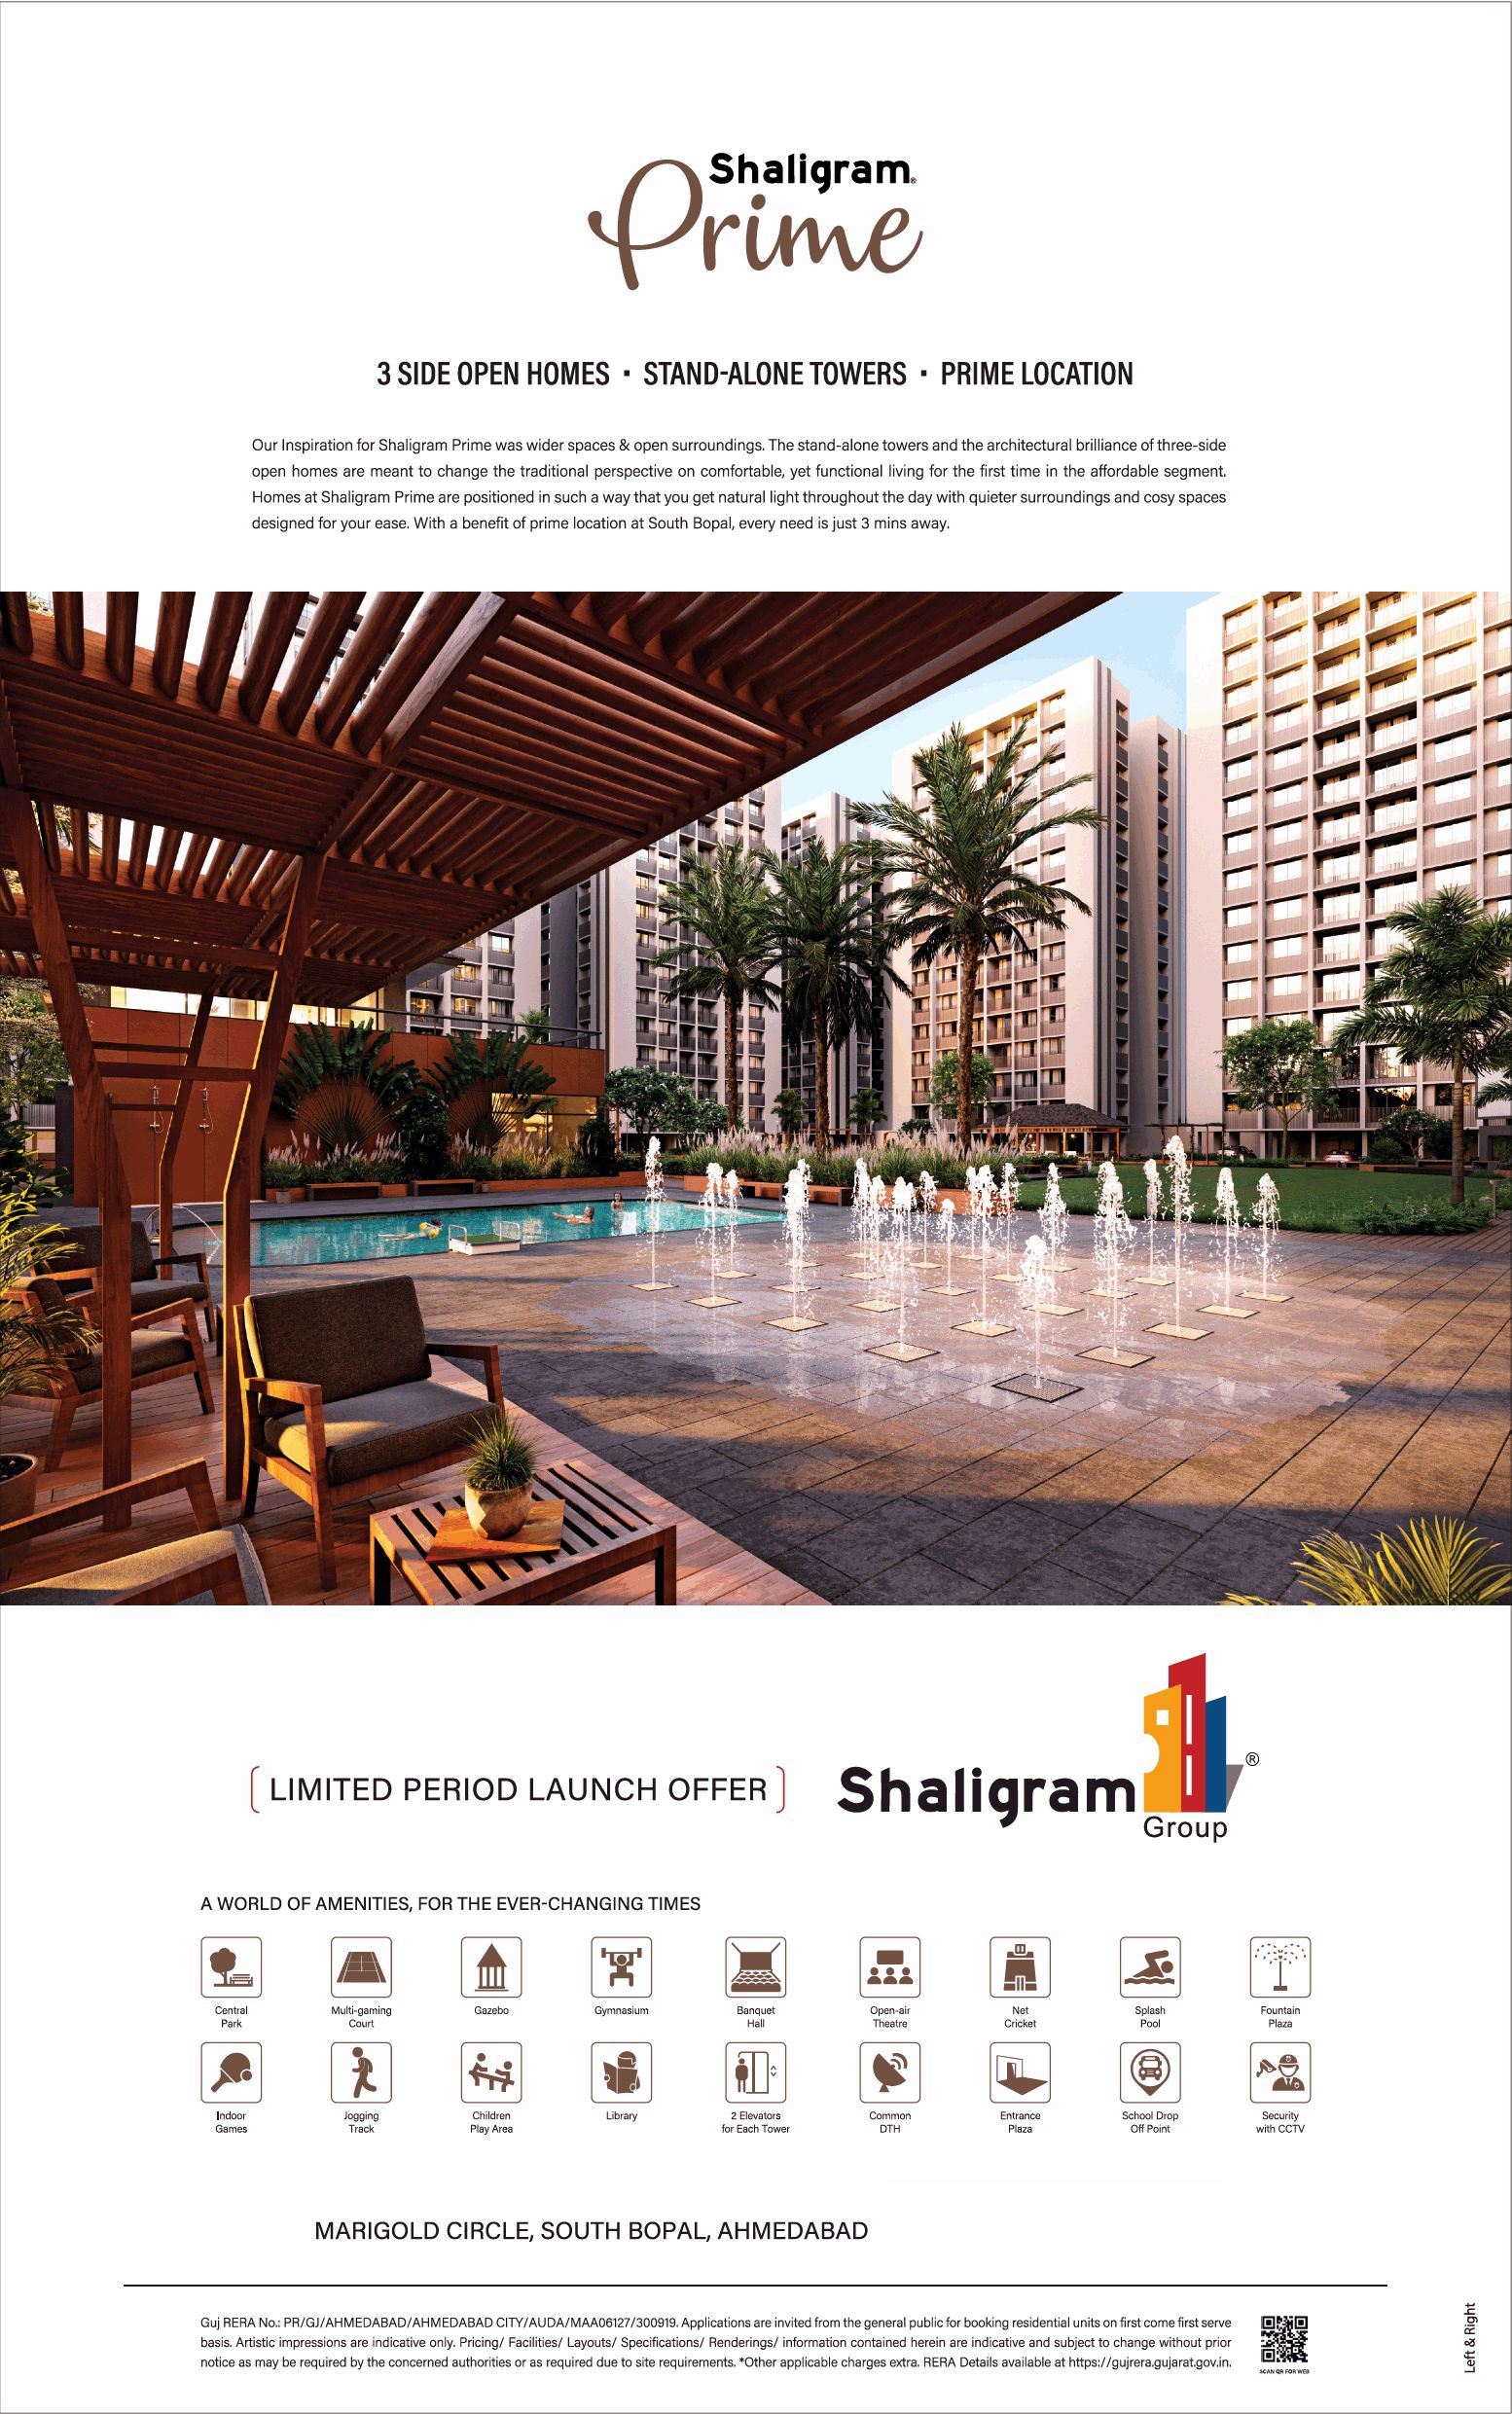 Presenting 3 side open homes, stand-alone towers and prime location at Shaligram Prime, Ahmedabad